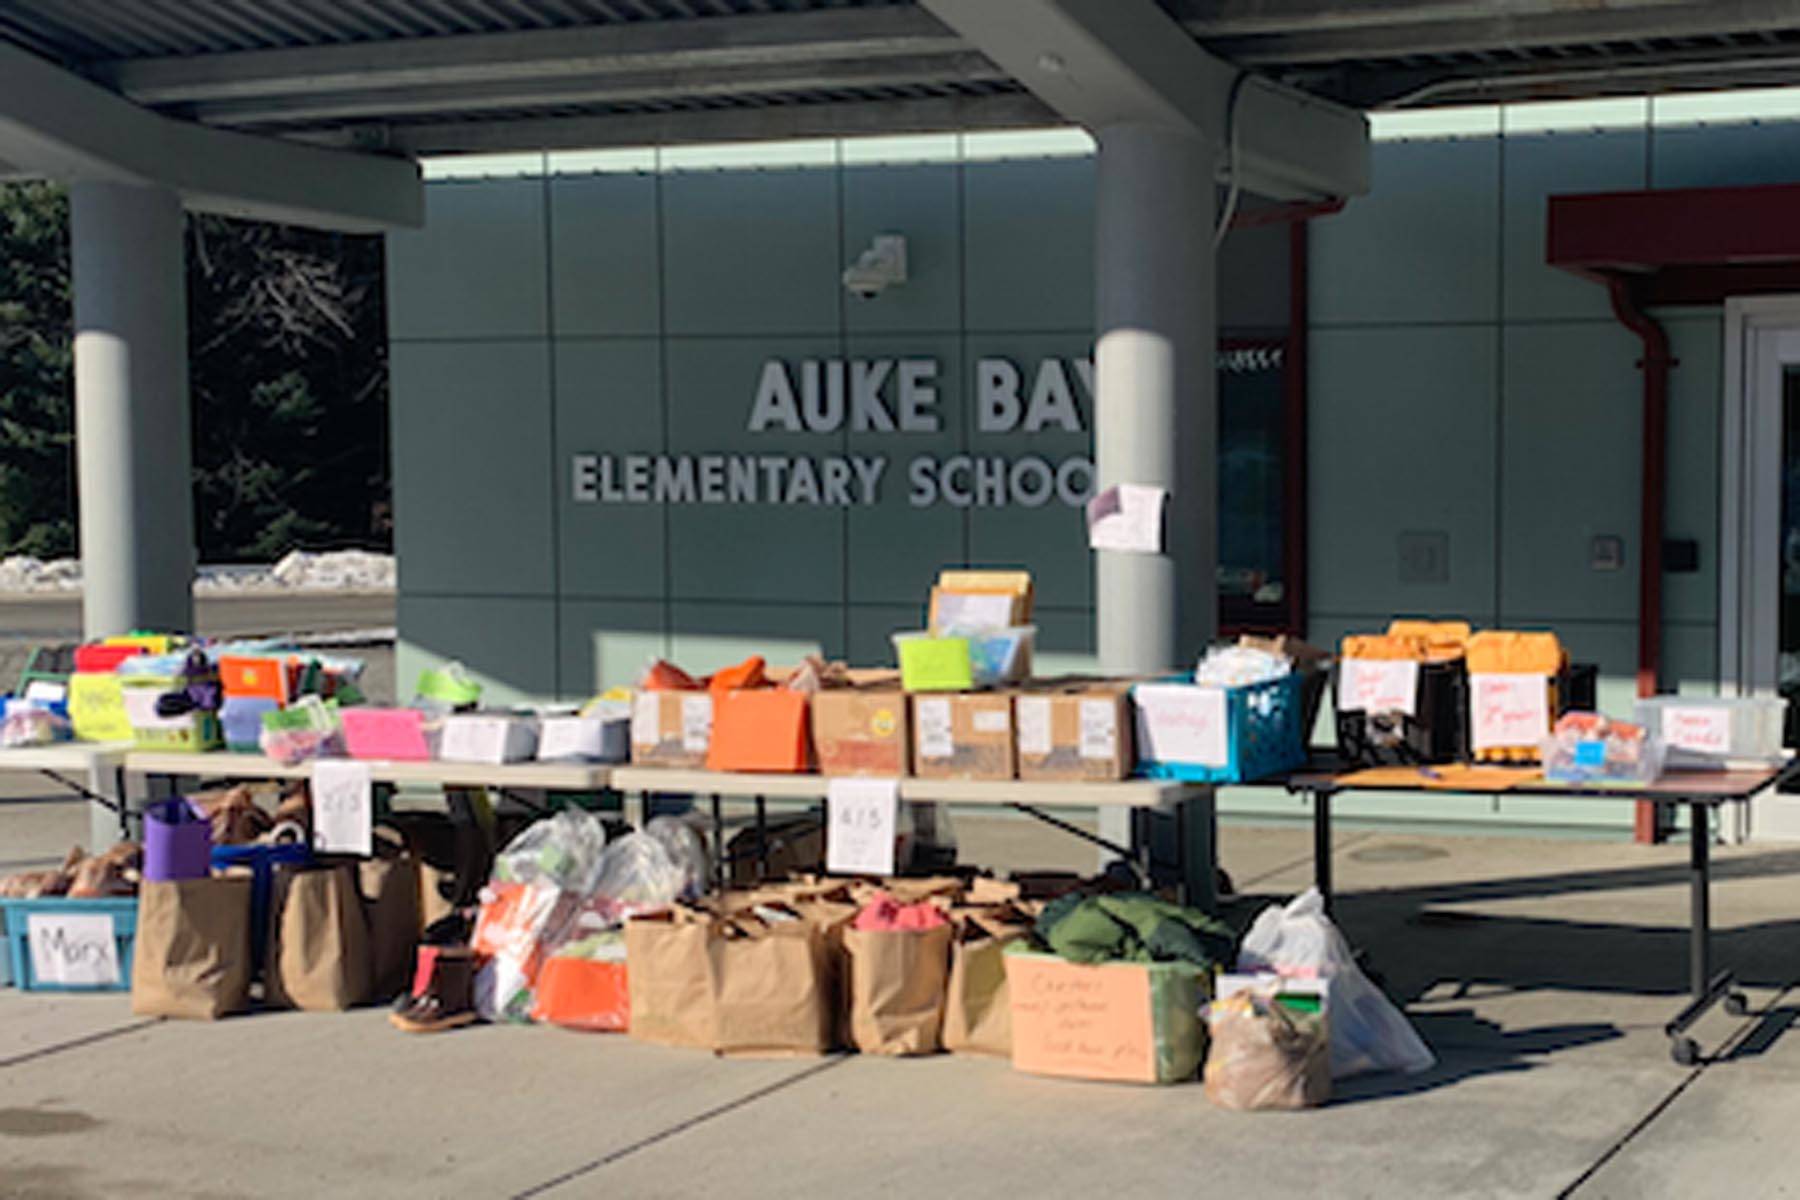 Materials for remote learning are stacked outside Auke Bay Elementary School. (Courtesy photo | Juneau School District)